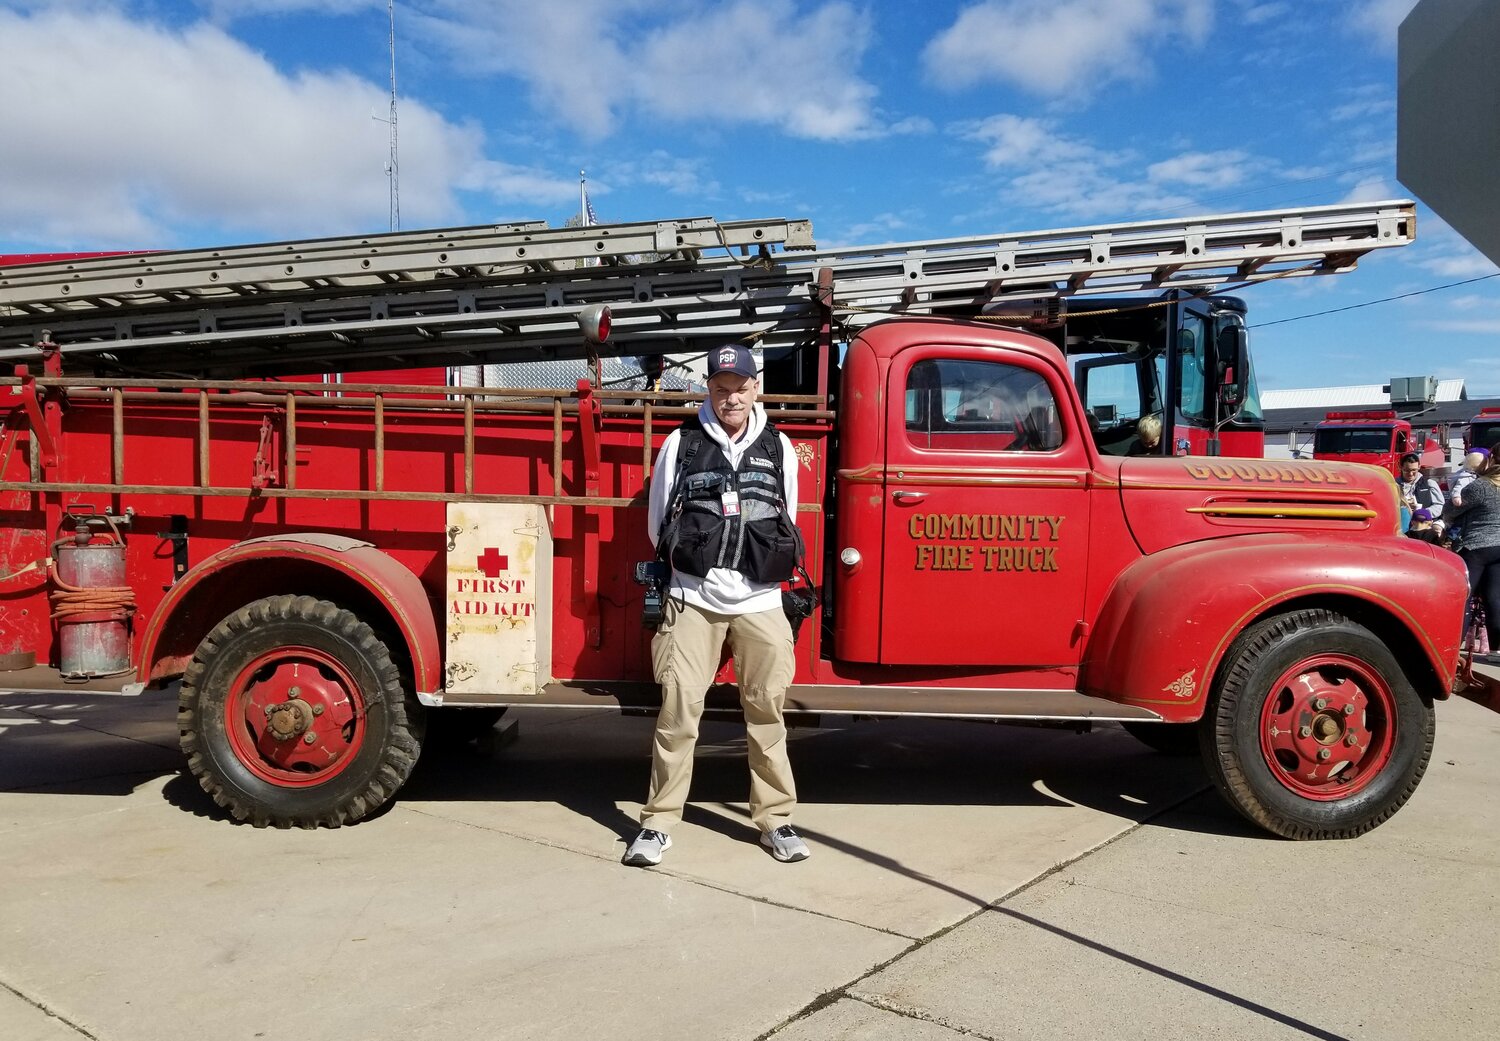 Mike Yungers, grandson of John Yungers who served on the Goodhue Fire Department in the 1930's, poses with the original 1941 fire engine that was on display next to the brand new pumper truck recently acquired by the GFD.  Yungers is a public safety photographer who has previously worked with the department and was in town for the annual open house and fundraiser on October 15th.